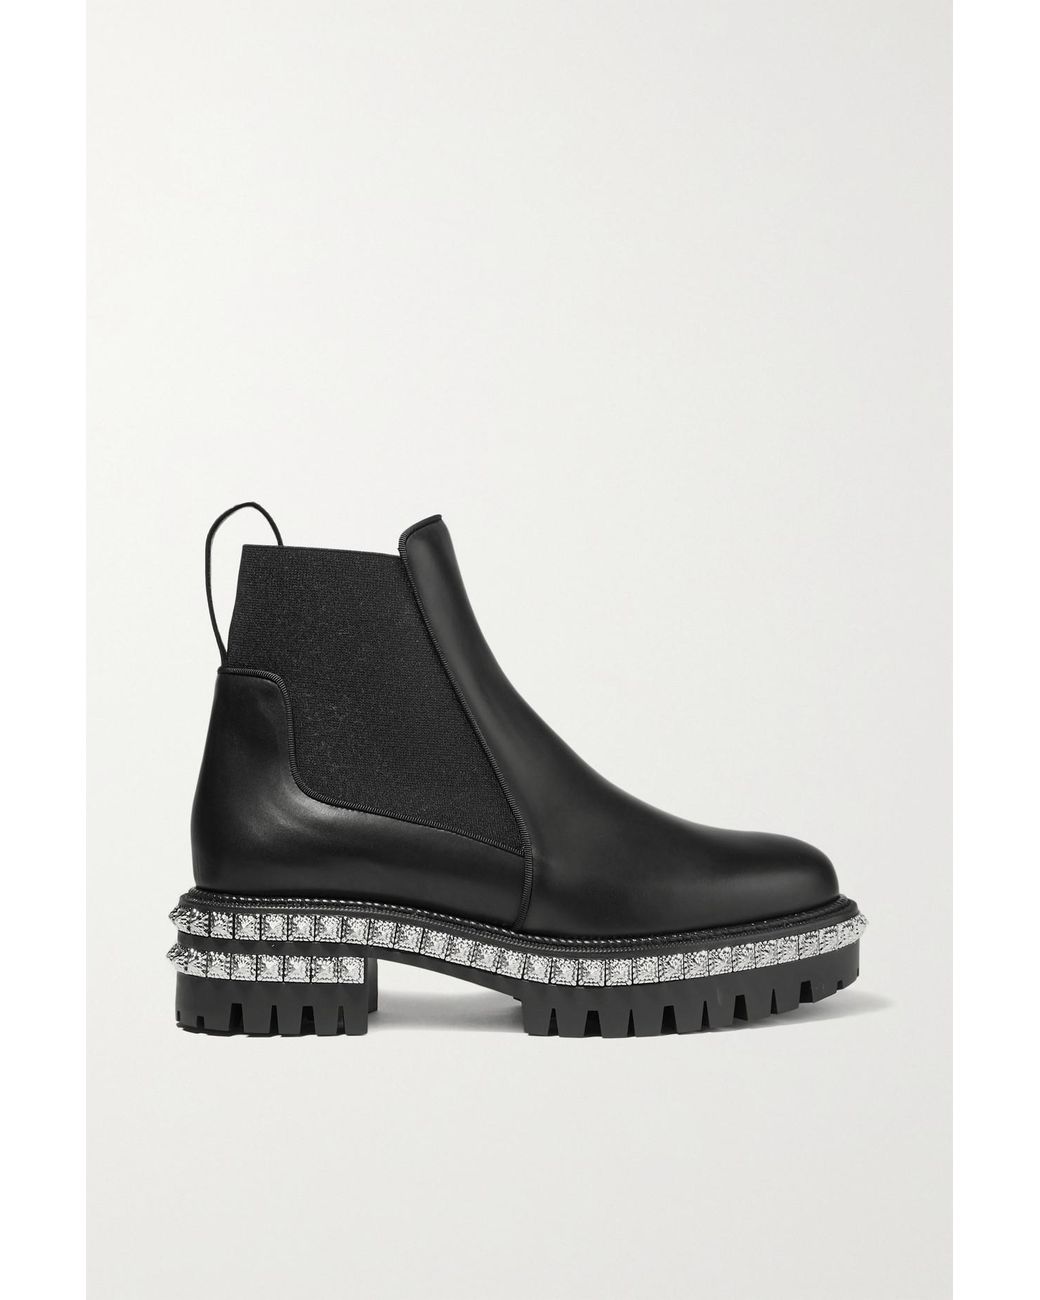 Christian Louboutin Notting Hill 25 Studded Leather Chelsea Boots